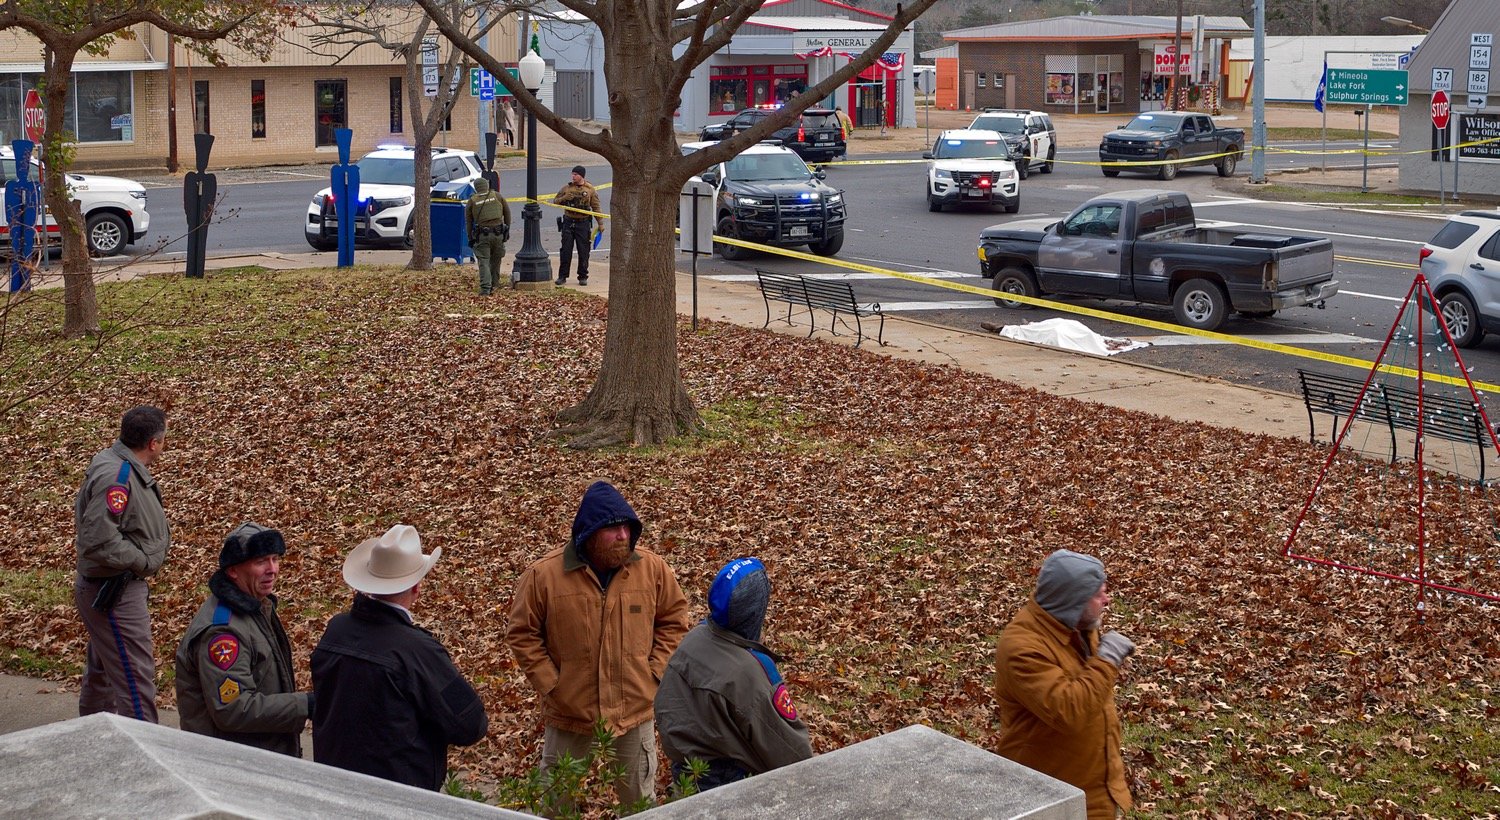 Officers from multiple agencies stand by for processing of the crime scene of a fatal shooting Thursday afternoon in downtown Quitman. [view more from scene]